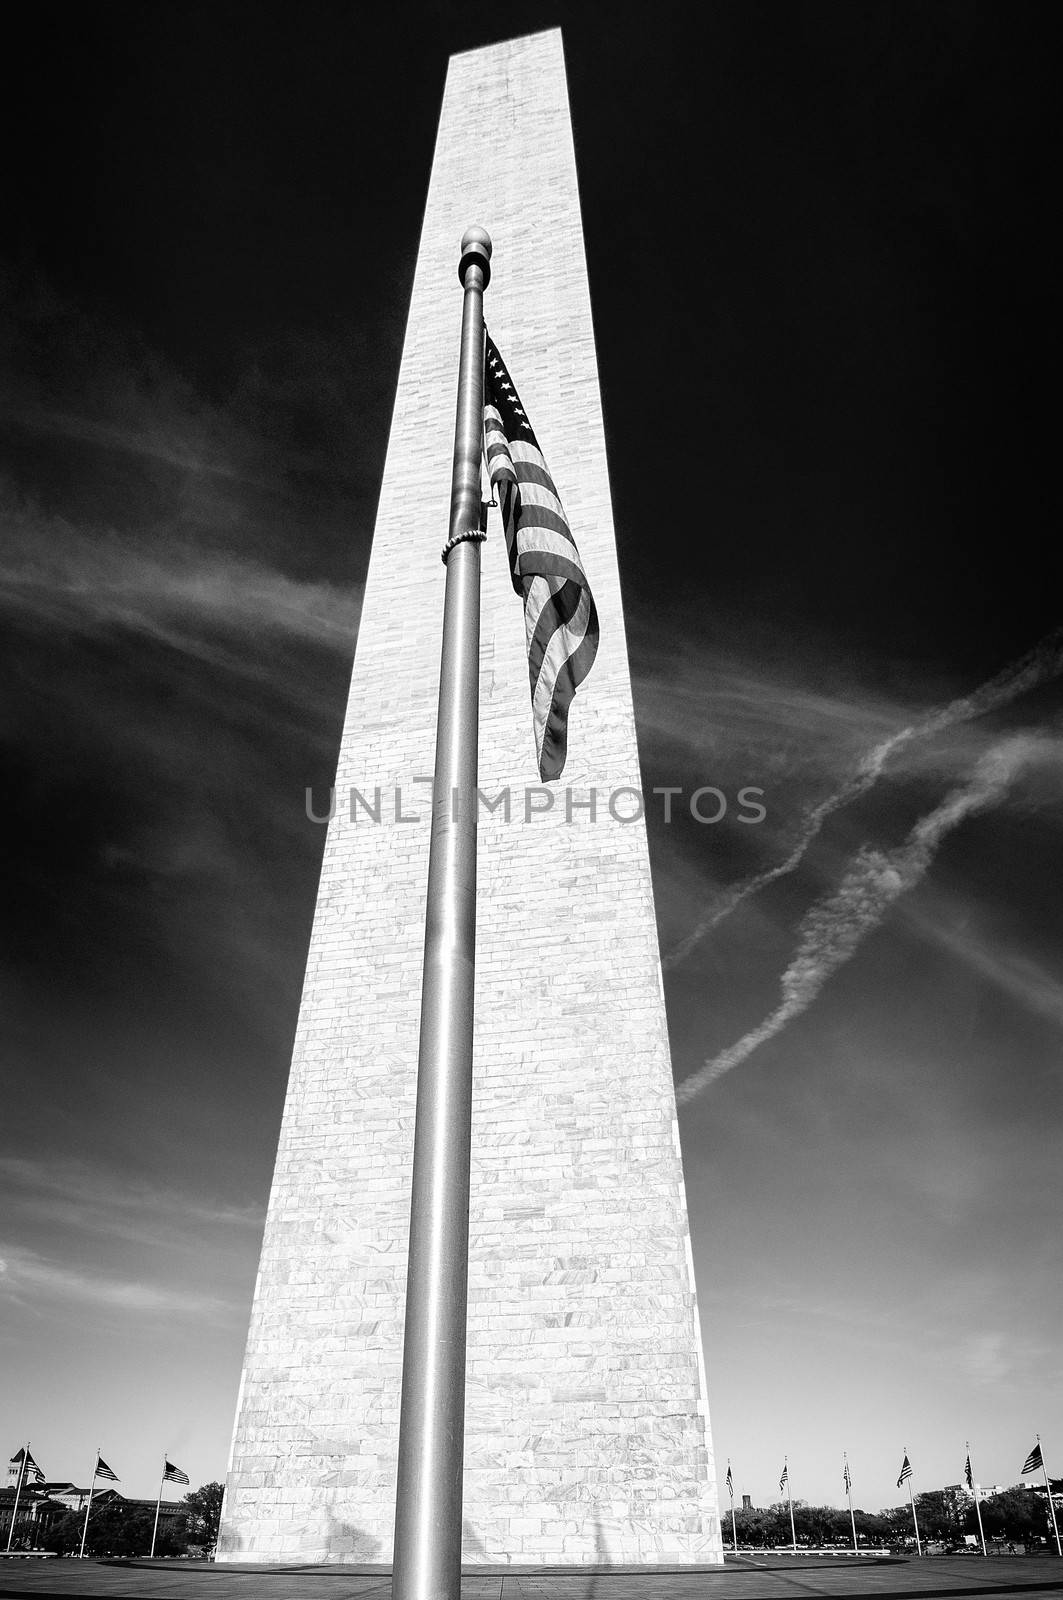 Flags at Washington monument by CelsoDiniz